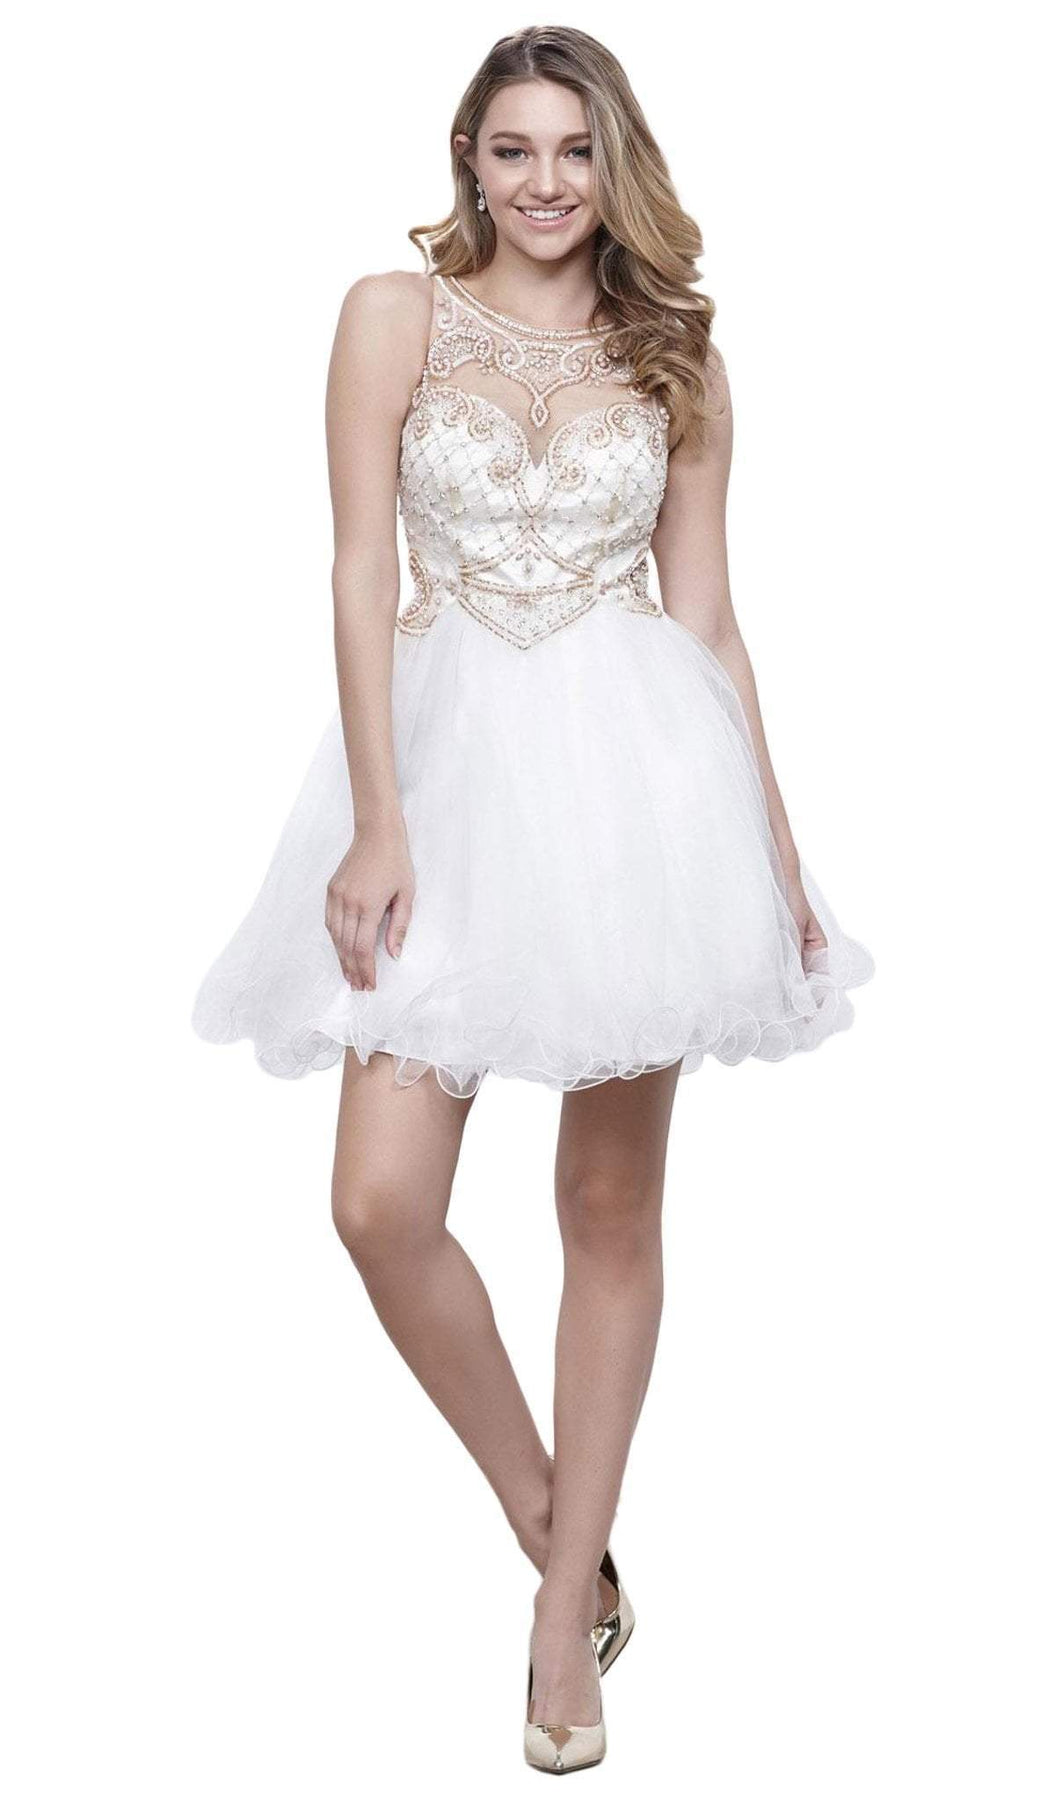 Nox Anabel - 6271 Bead-Embellished Illusion Cocktail Dress Special Occasion Dress XS / Ivory & Gold